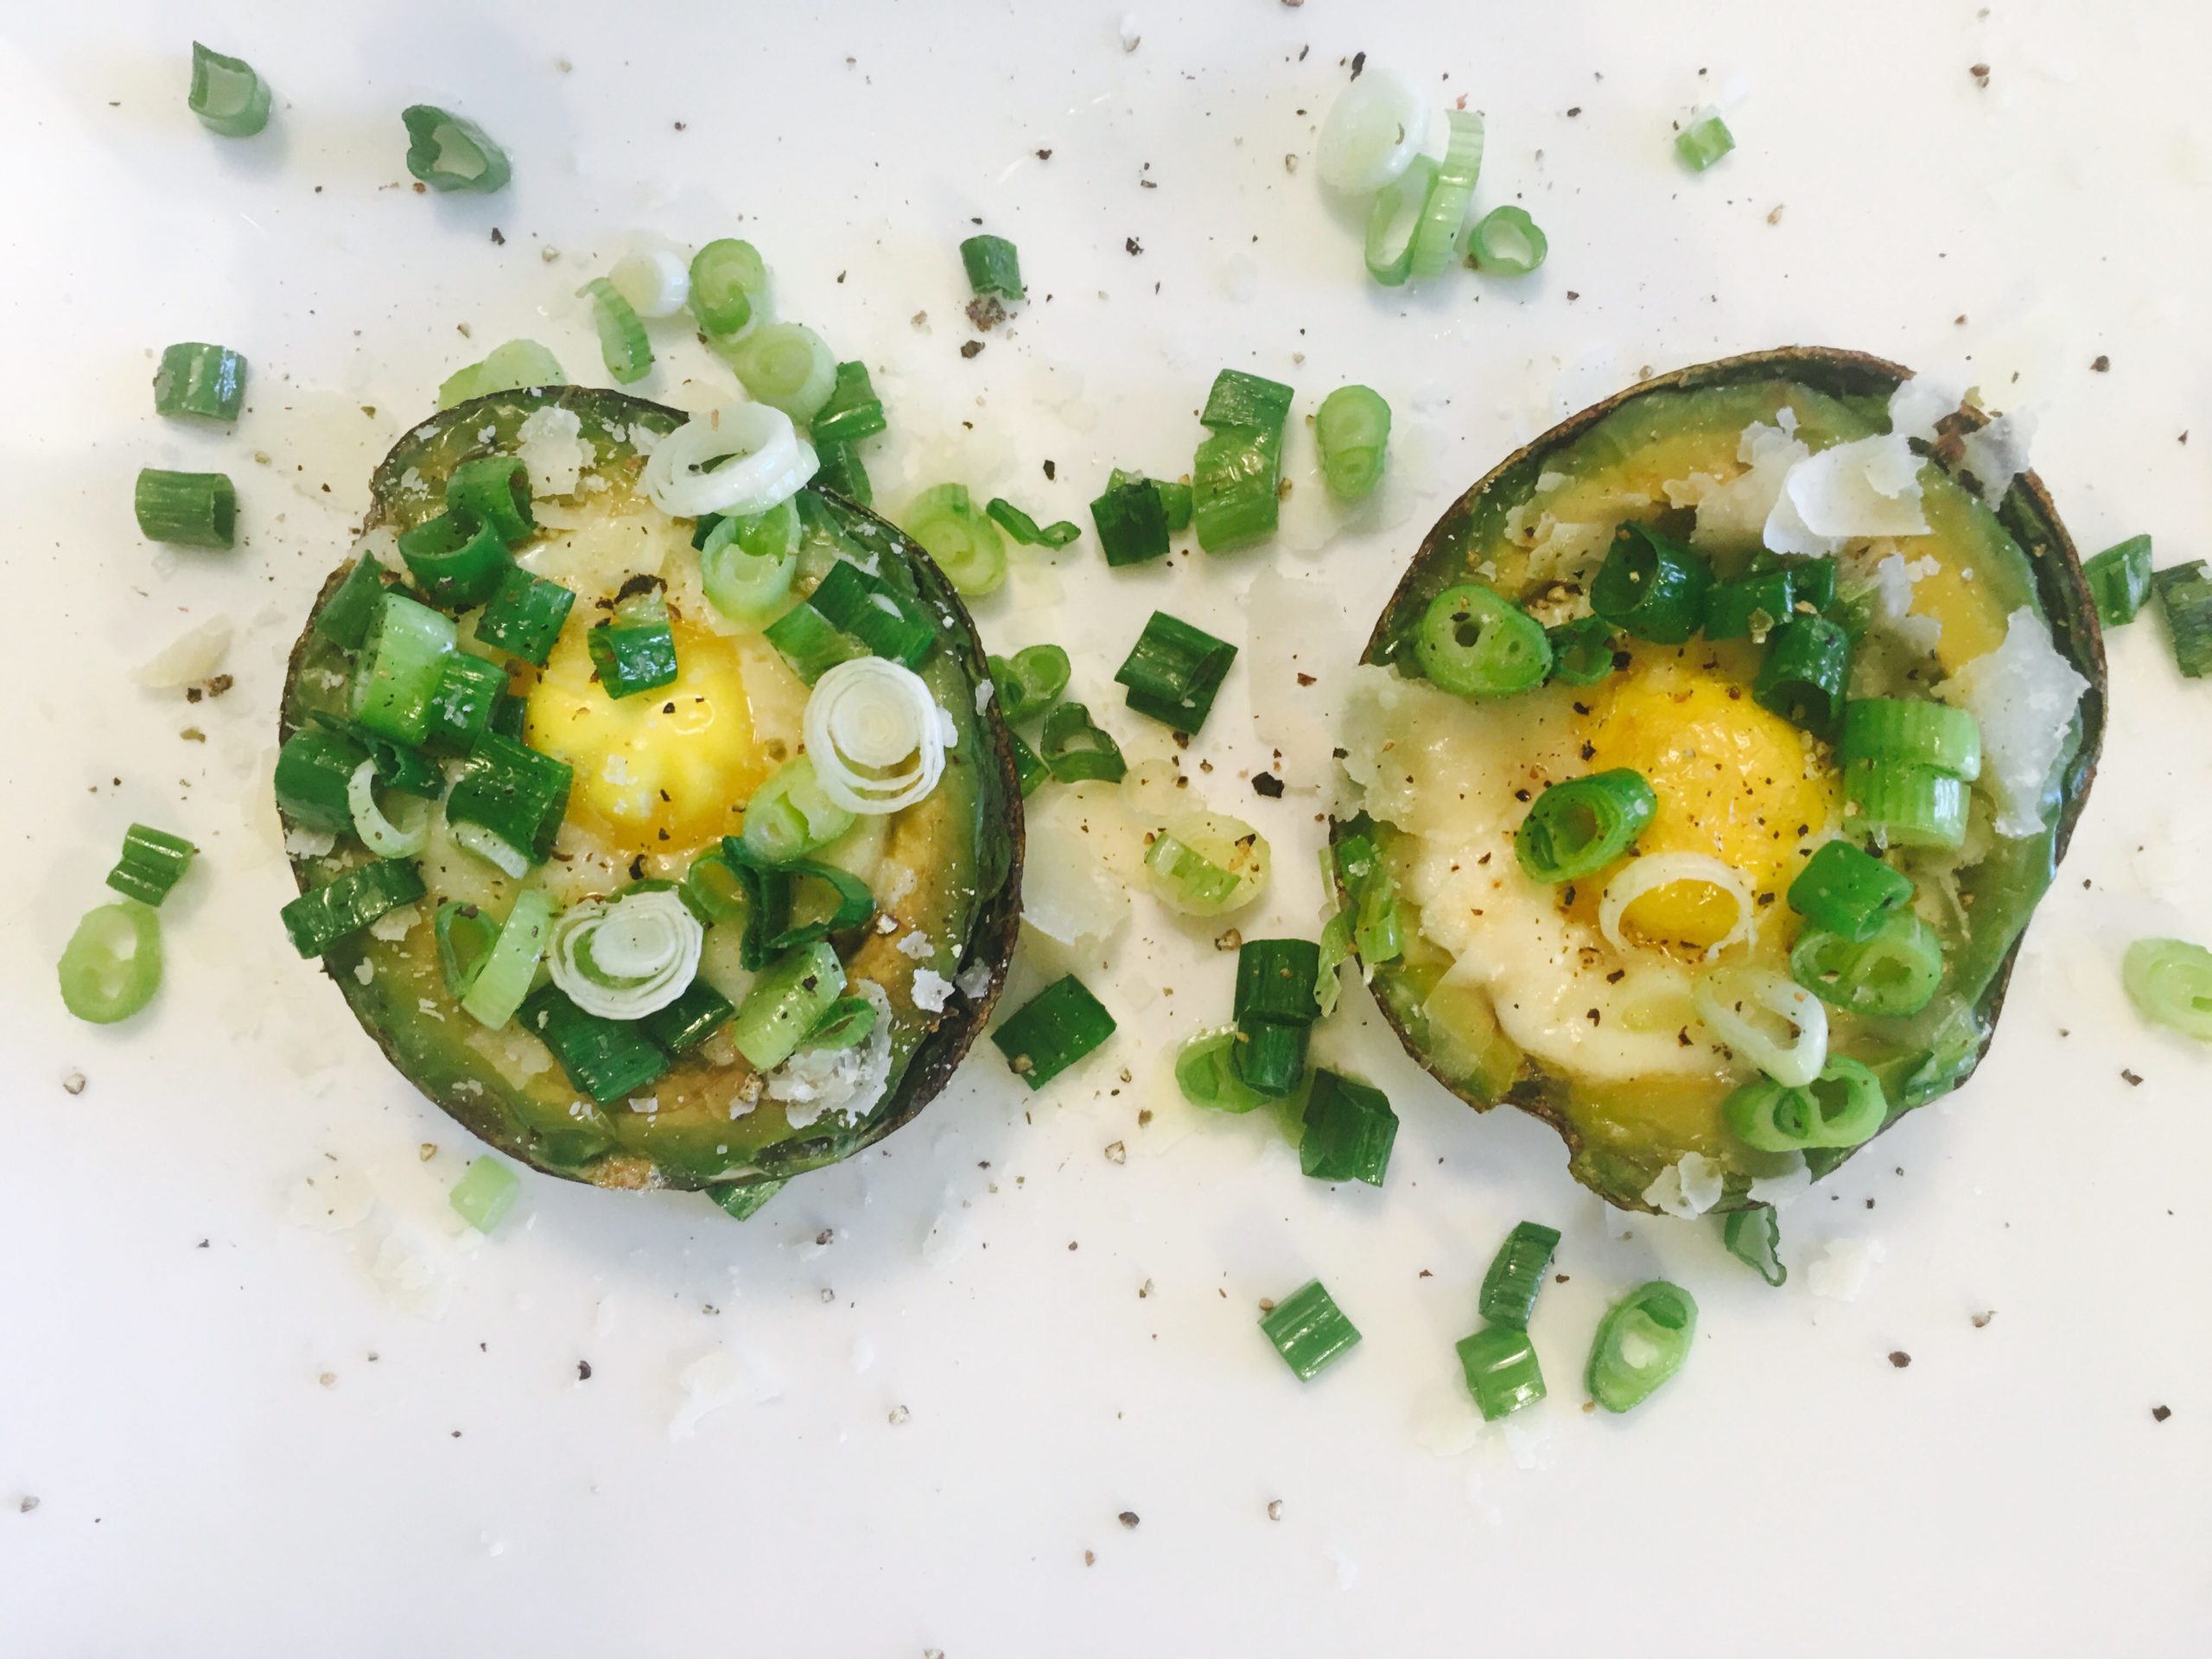 Avocados baked with eggs and scallions for breakfast